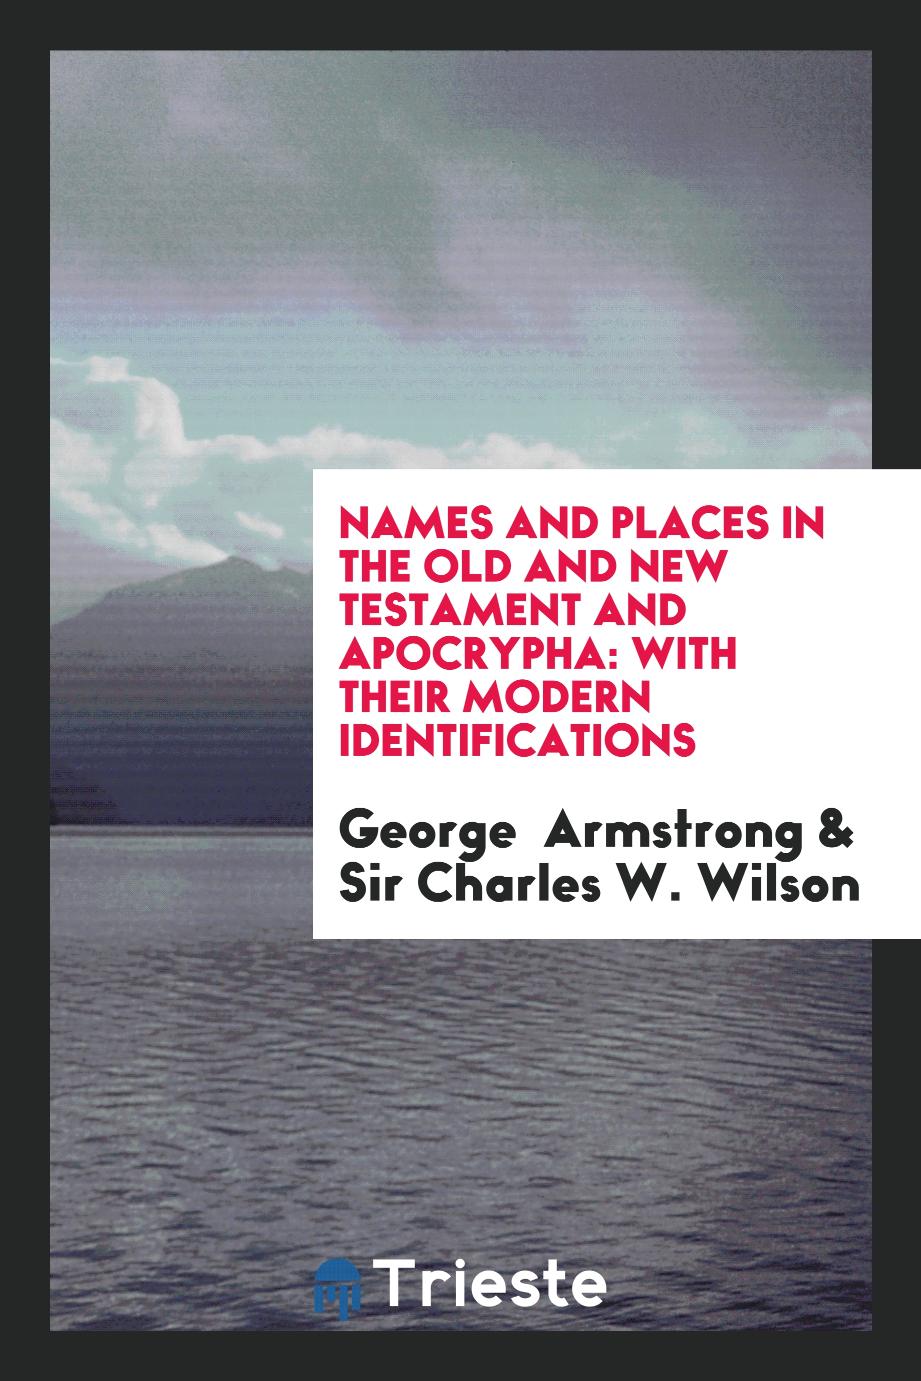 Names and Places in the Old and New Testament and Apocrypha: With Their Modern Identifications